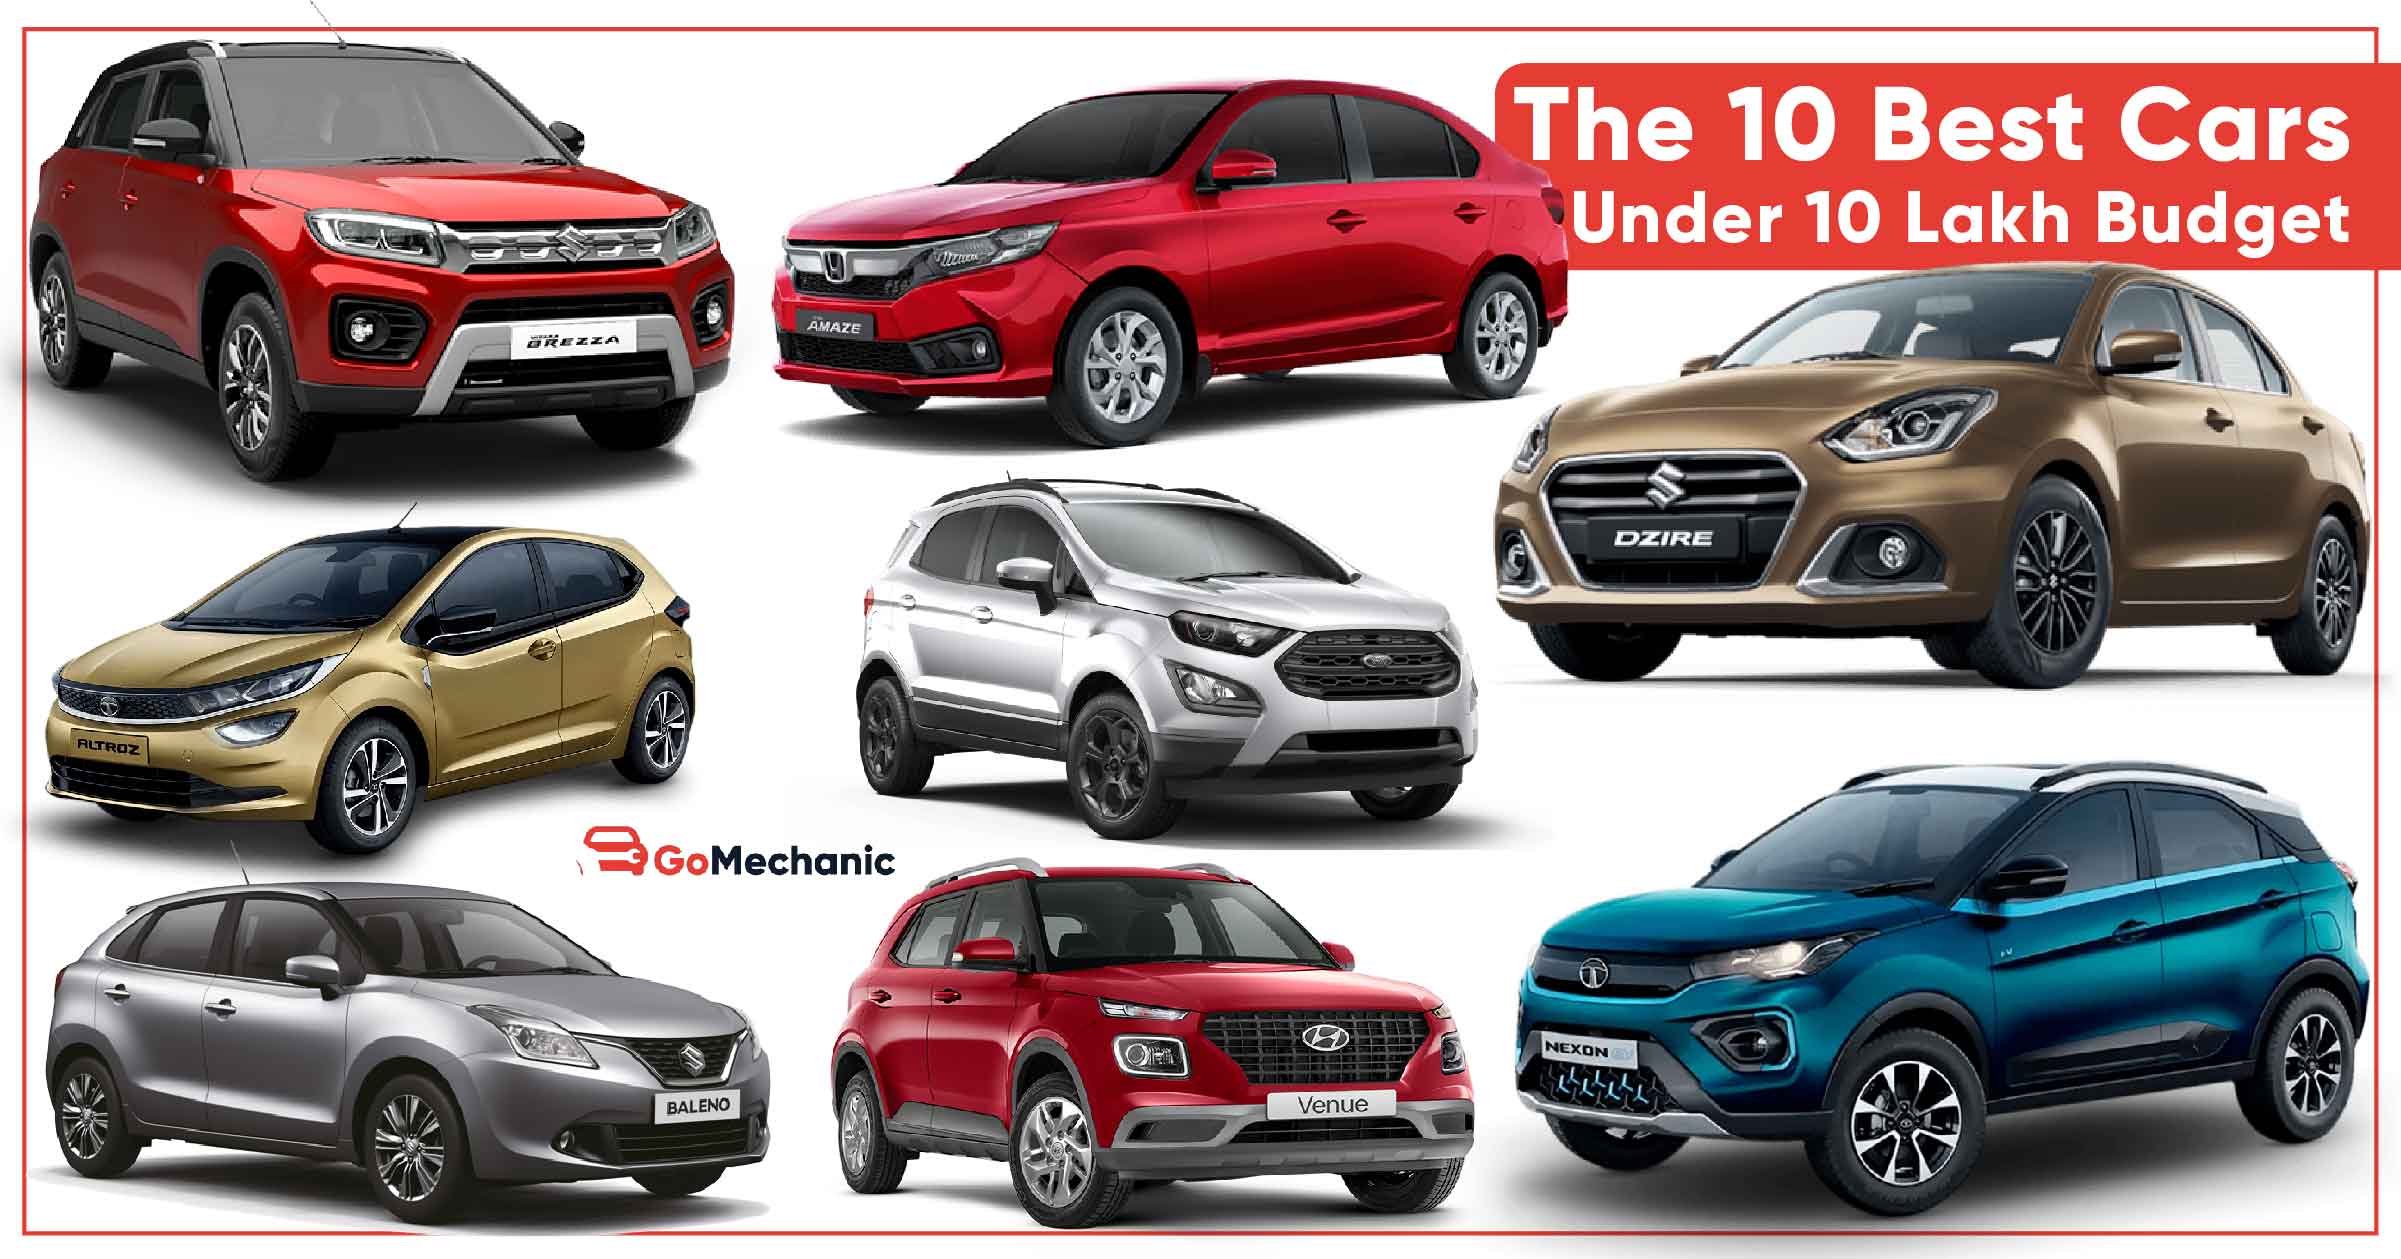 Car Options Under 10 Lakhs - CARCROT